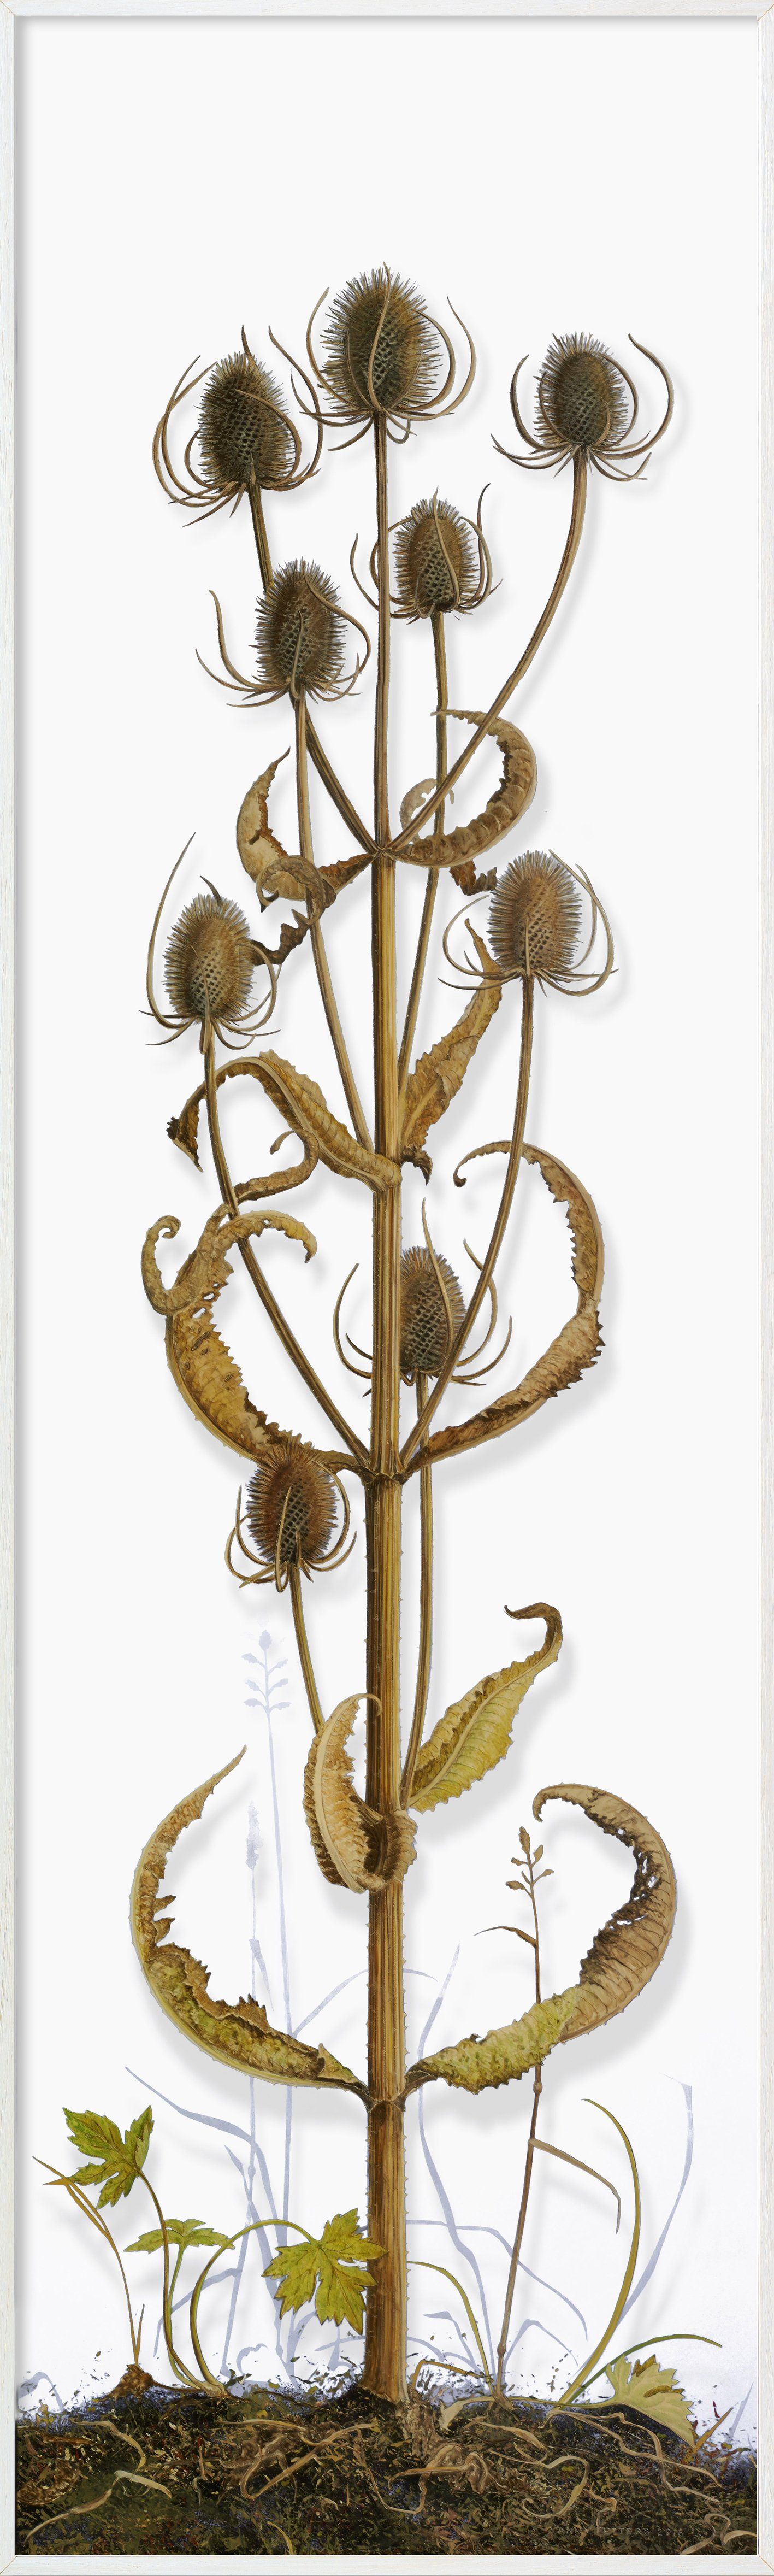 Teasel for finches, November by Yannhy Petters